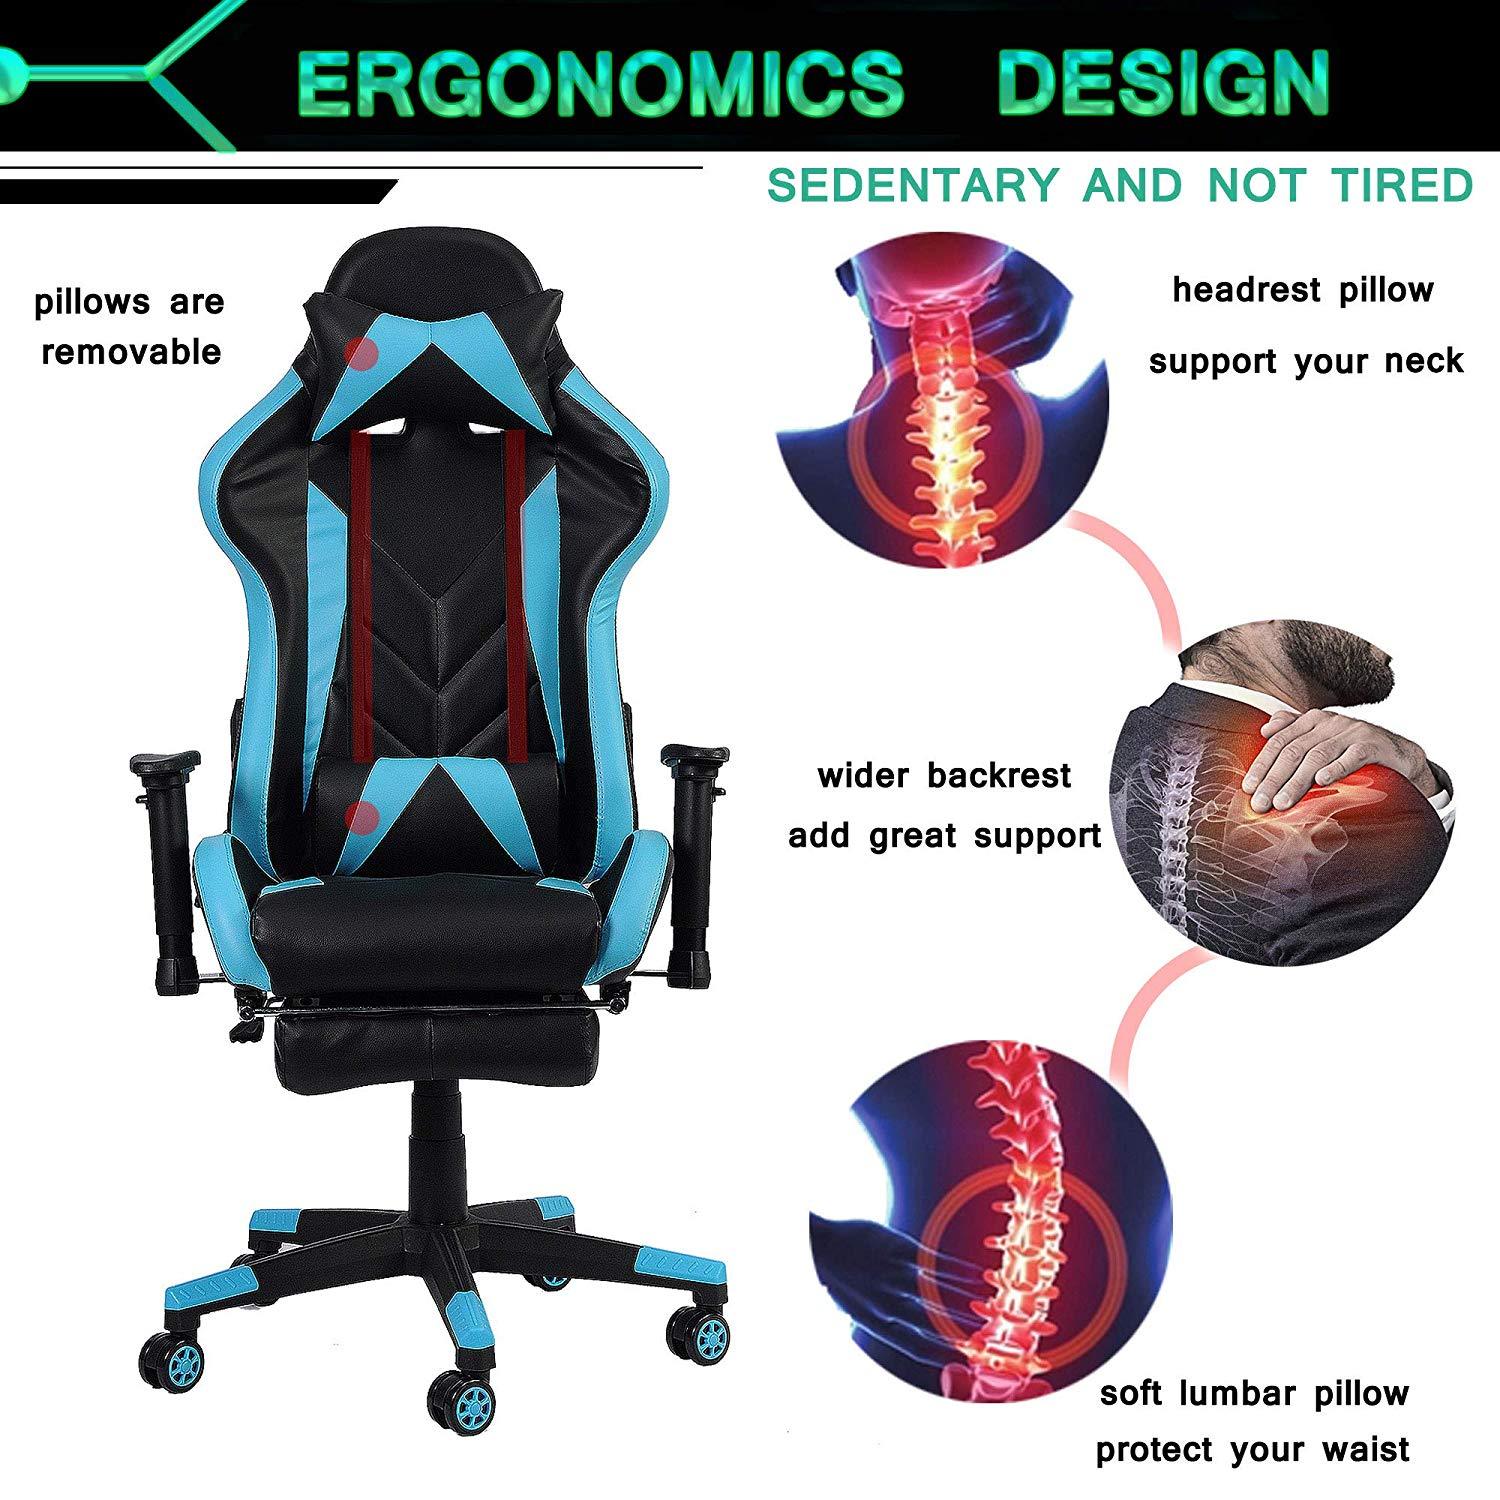 Bosonshop Gaming Desk Chair Ergonomic Office Chair with Footrest Racing Style